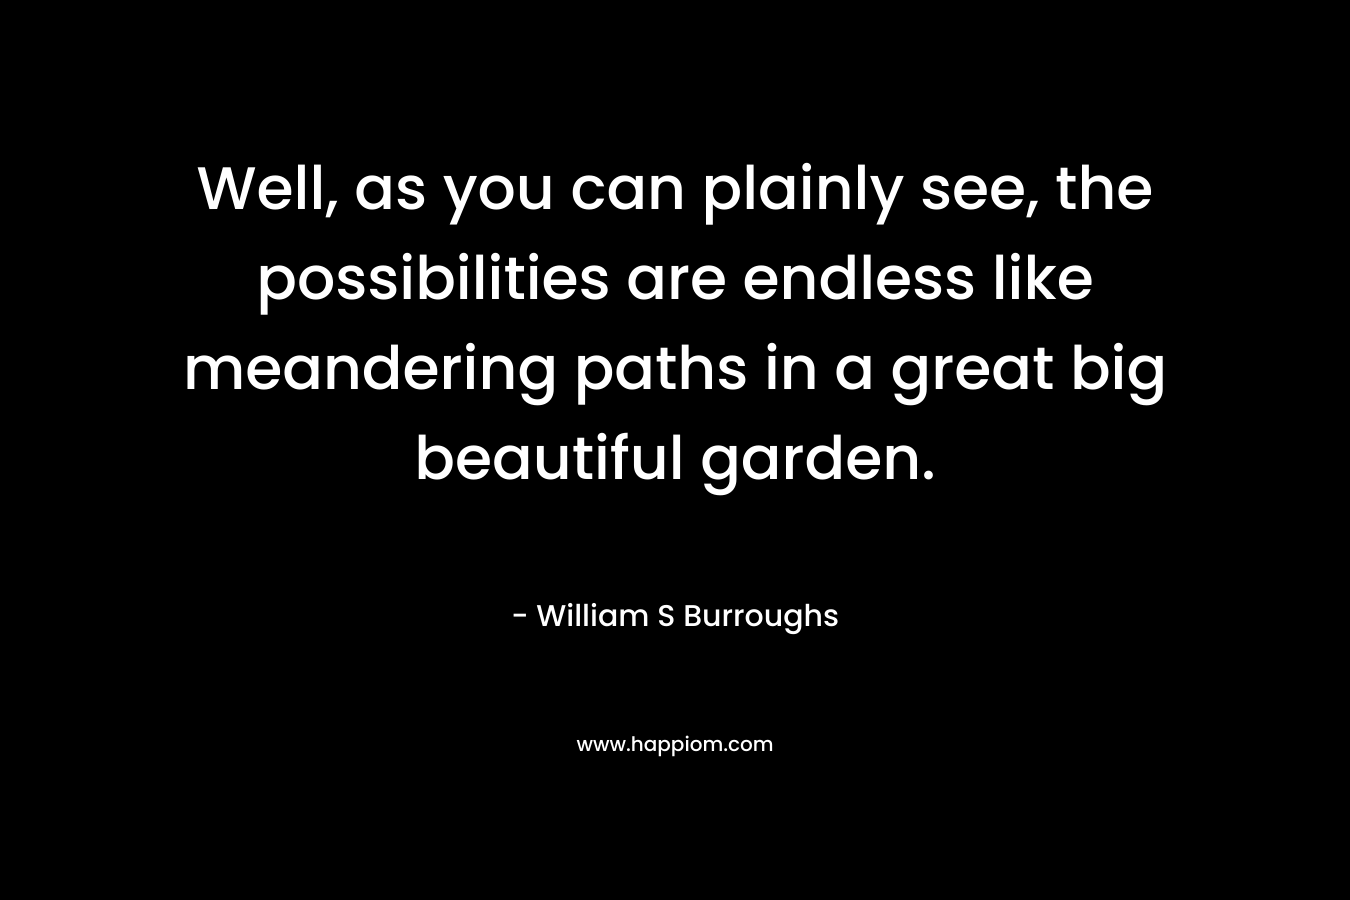 Well, as you can plainly see, the possibilities are endless like meandering paths in a great big beautiful garden. – William S Burroughs